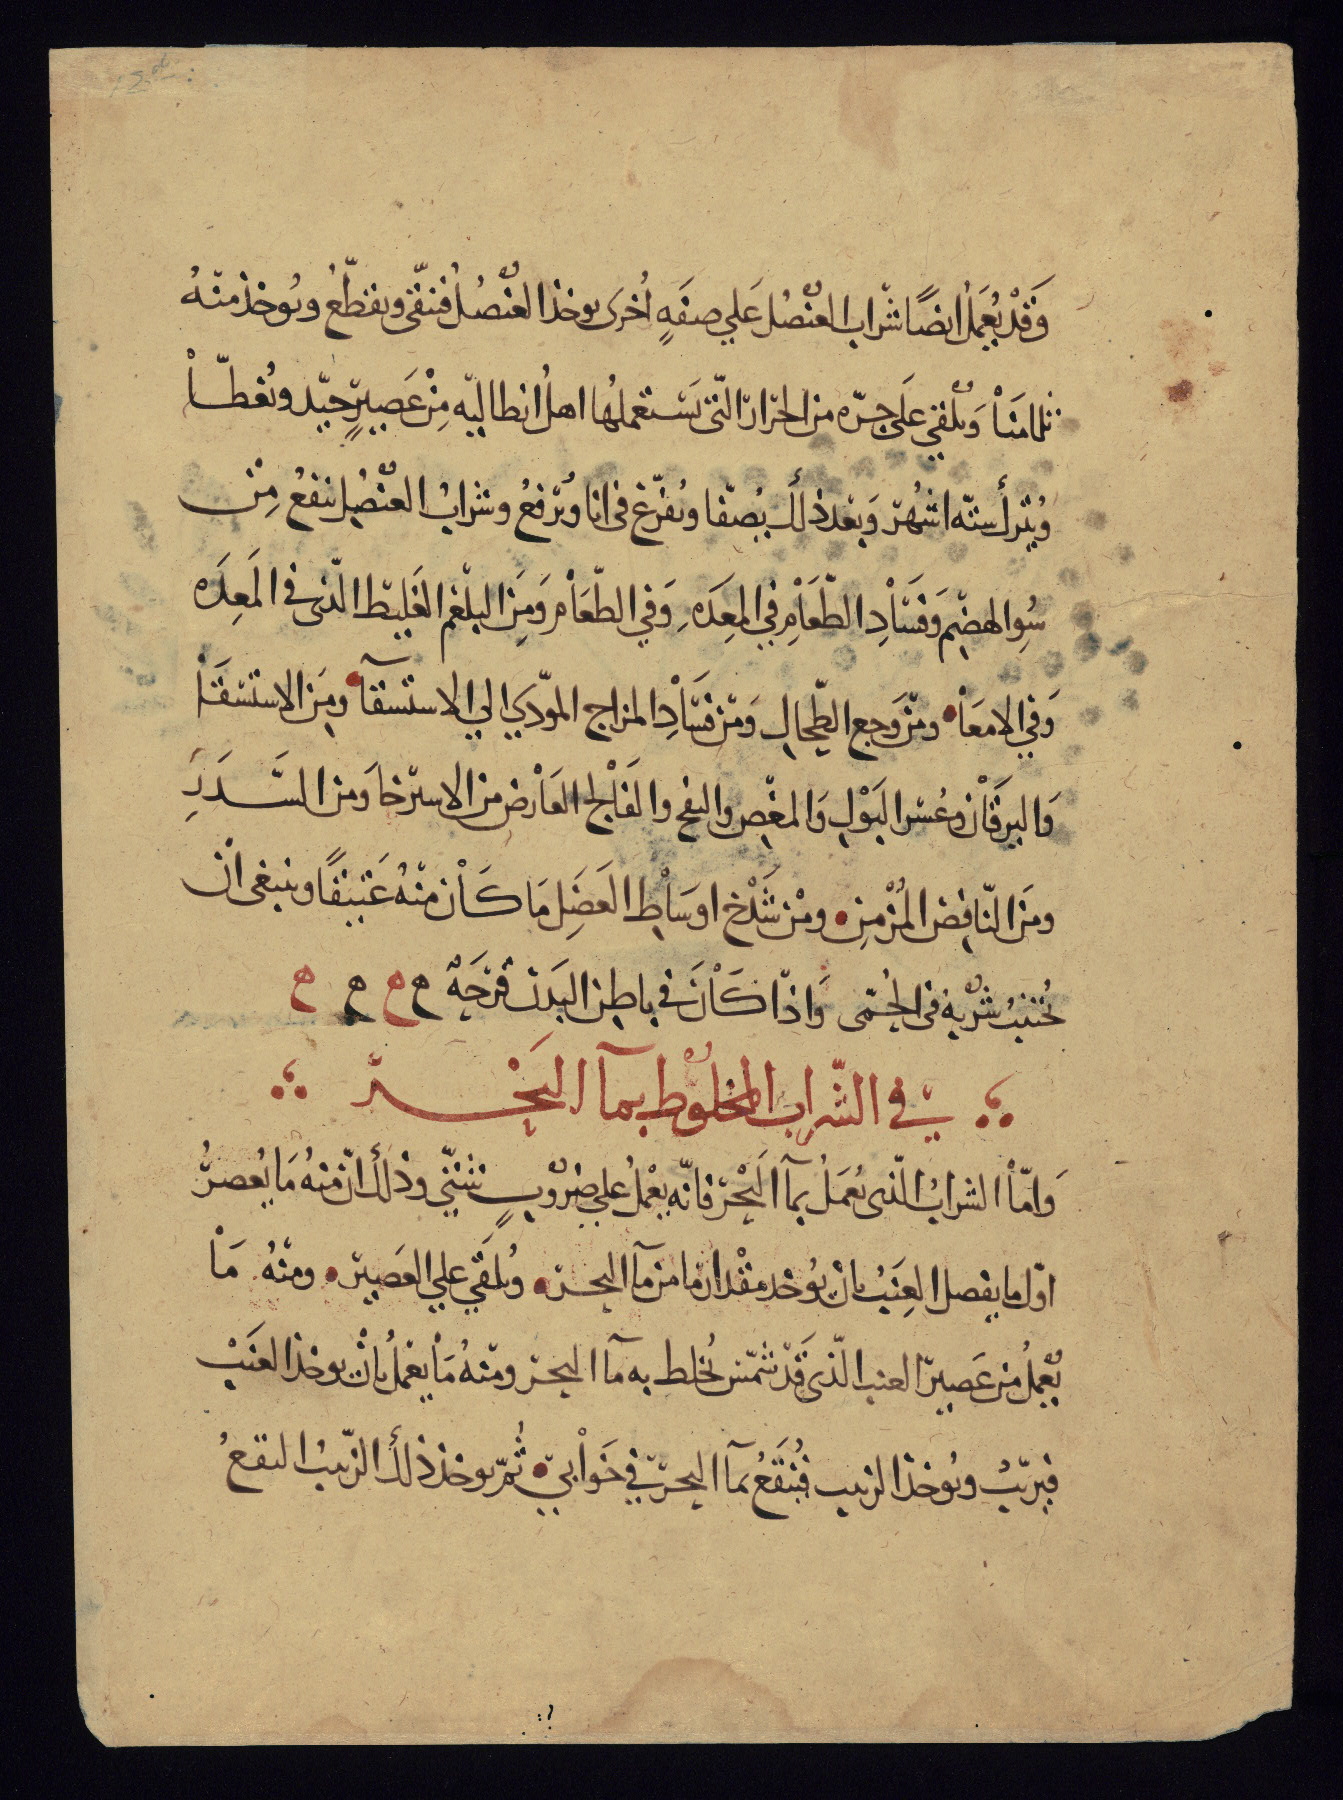 Walters Ms. W.675, Single leaf from the Arabic version of